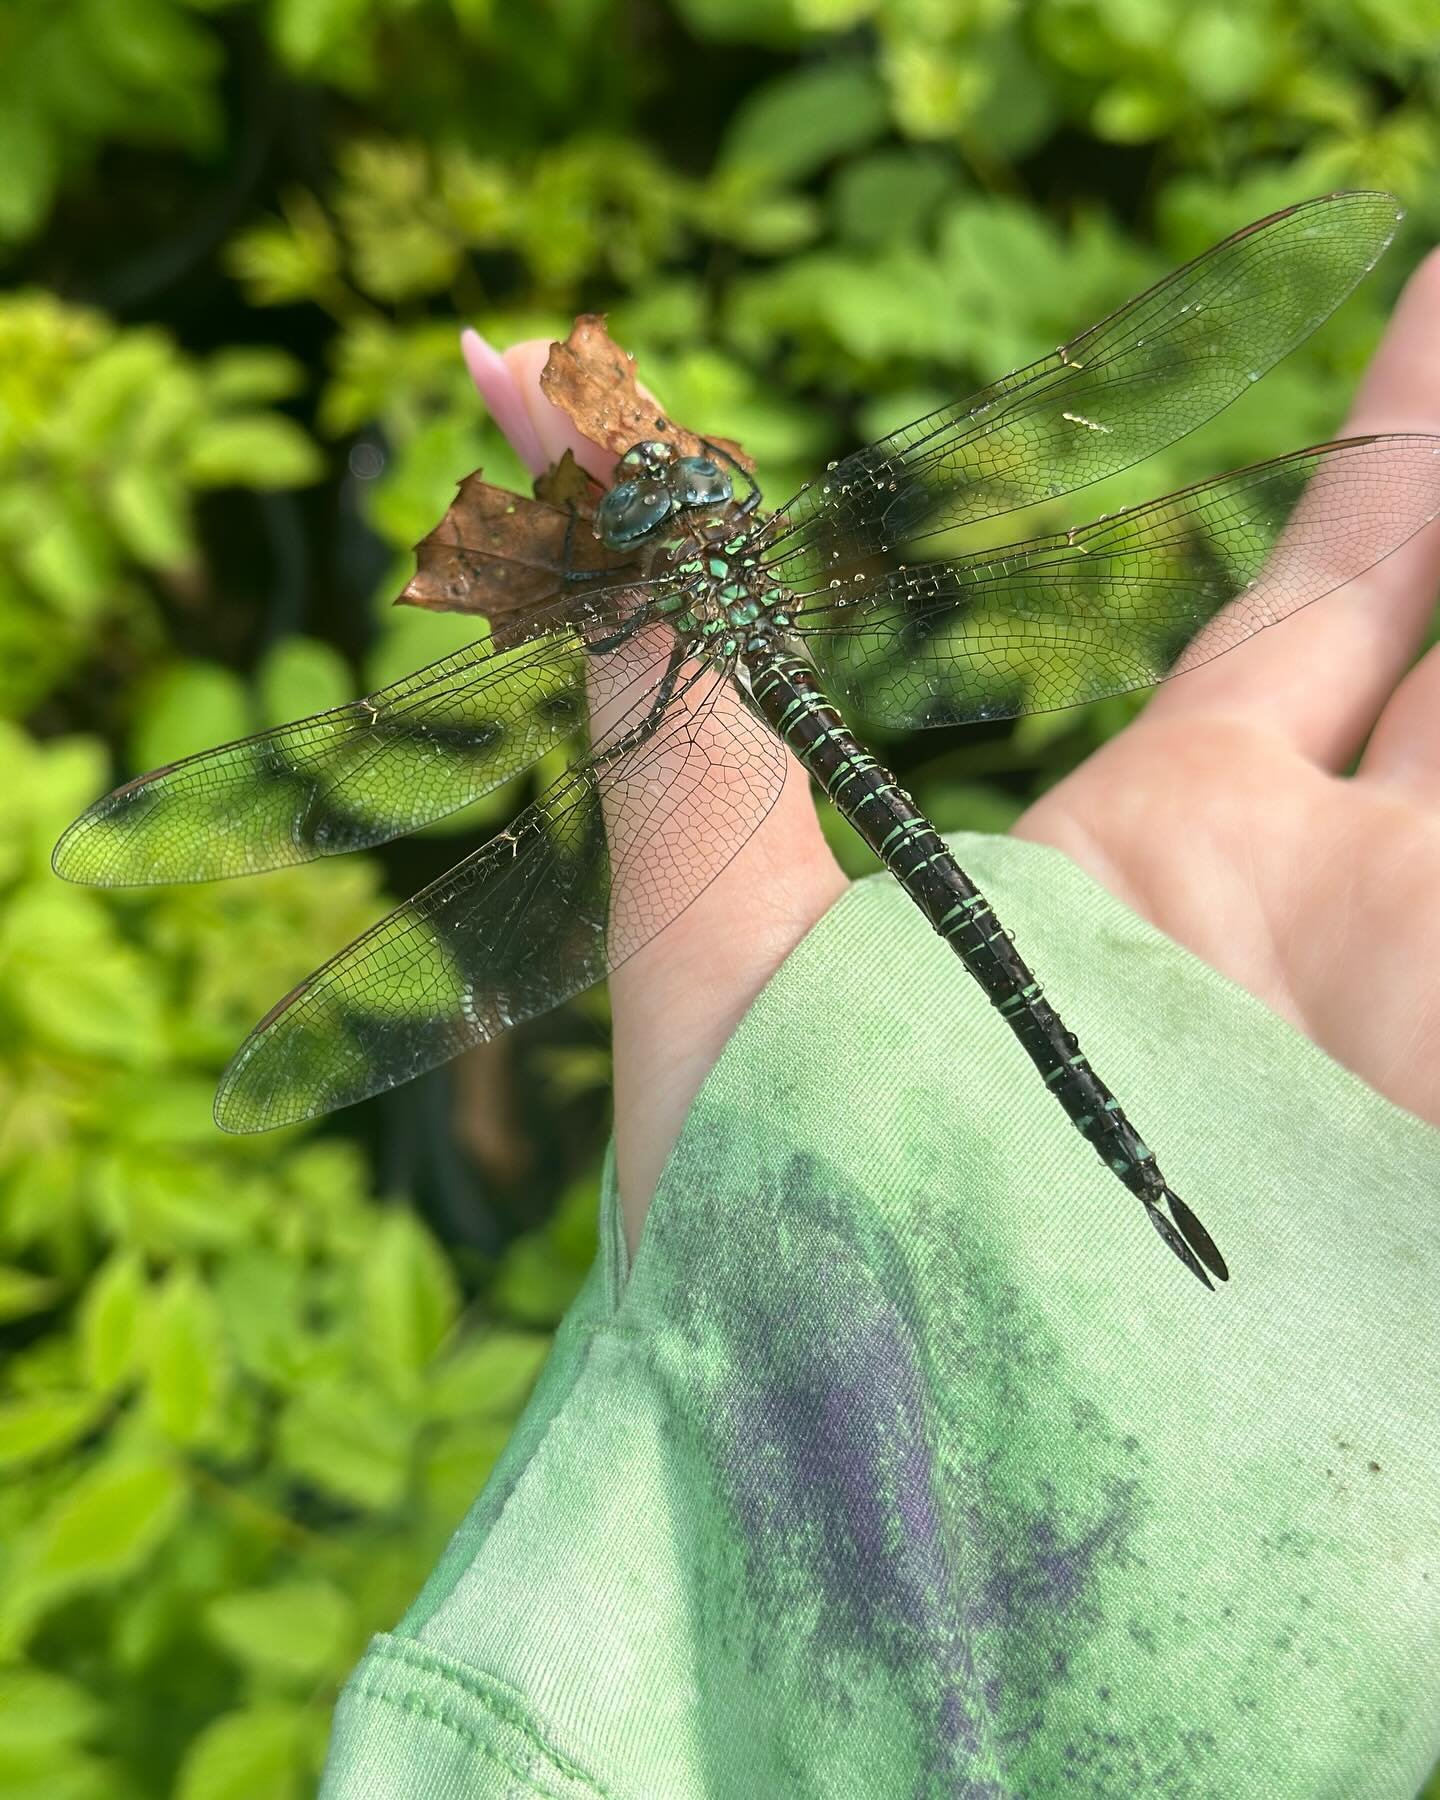 Found this gorgeous dragonfly while watering today, his wings got a little wet so I helped him dry off and he flew away! Insects are the best 💚🪲 #insects #dragonfly #northcarolina